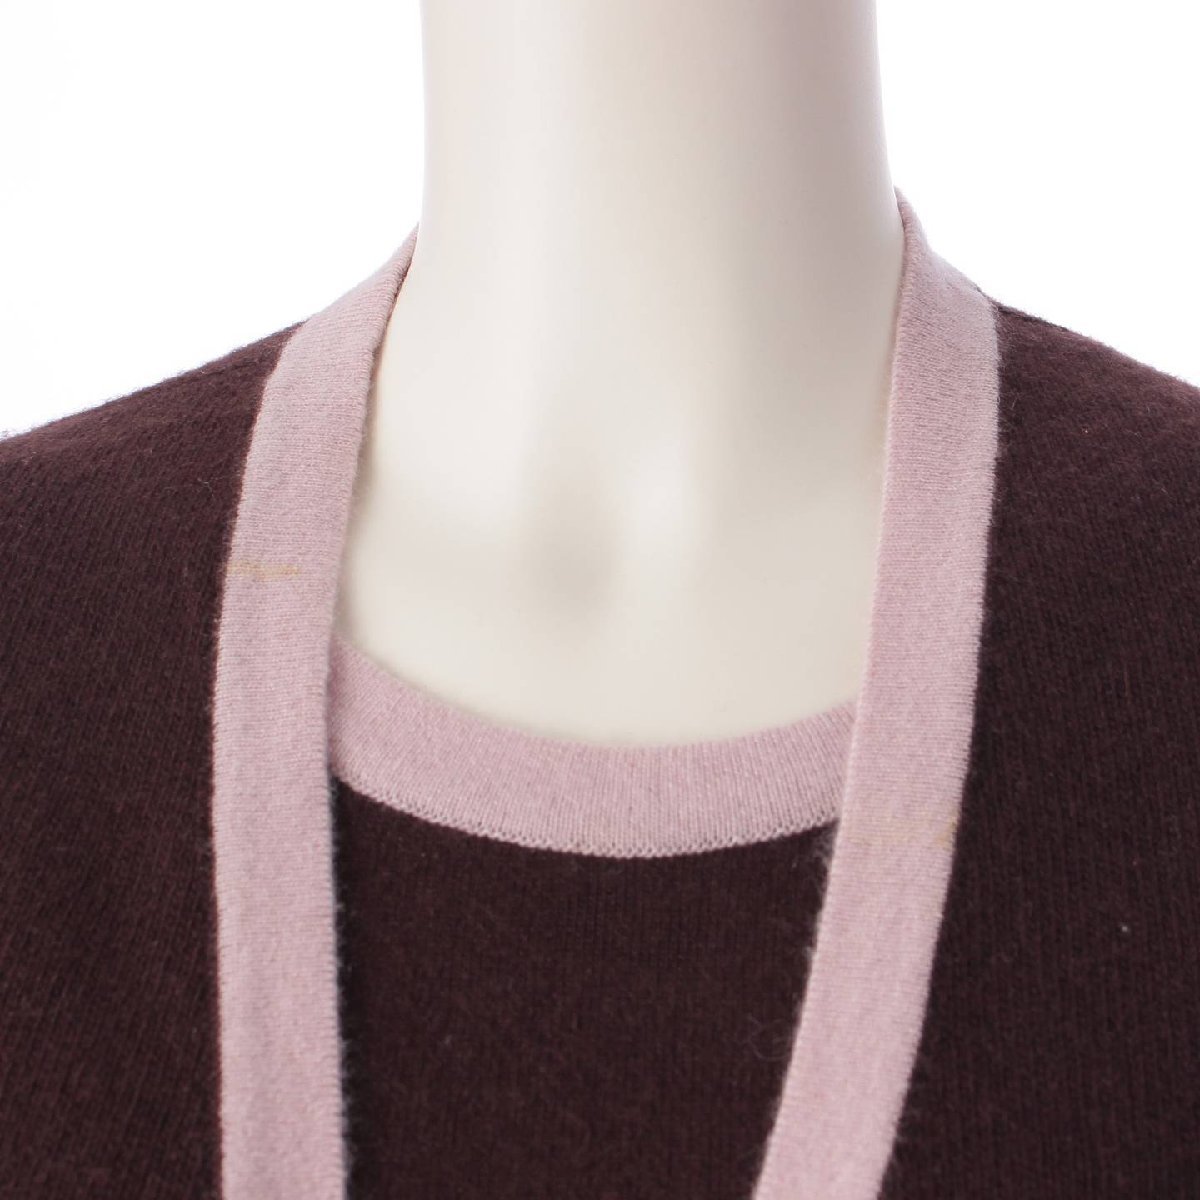 [ Chanel ]Chanel 02A cashmere knitted ensemble tops & cardigan P20298 Brown 42 [ used ][ regular goods guarantee ]197368